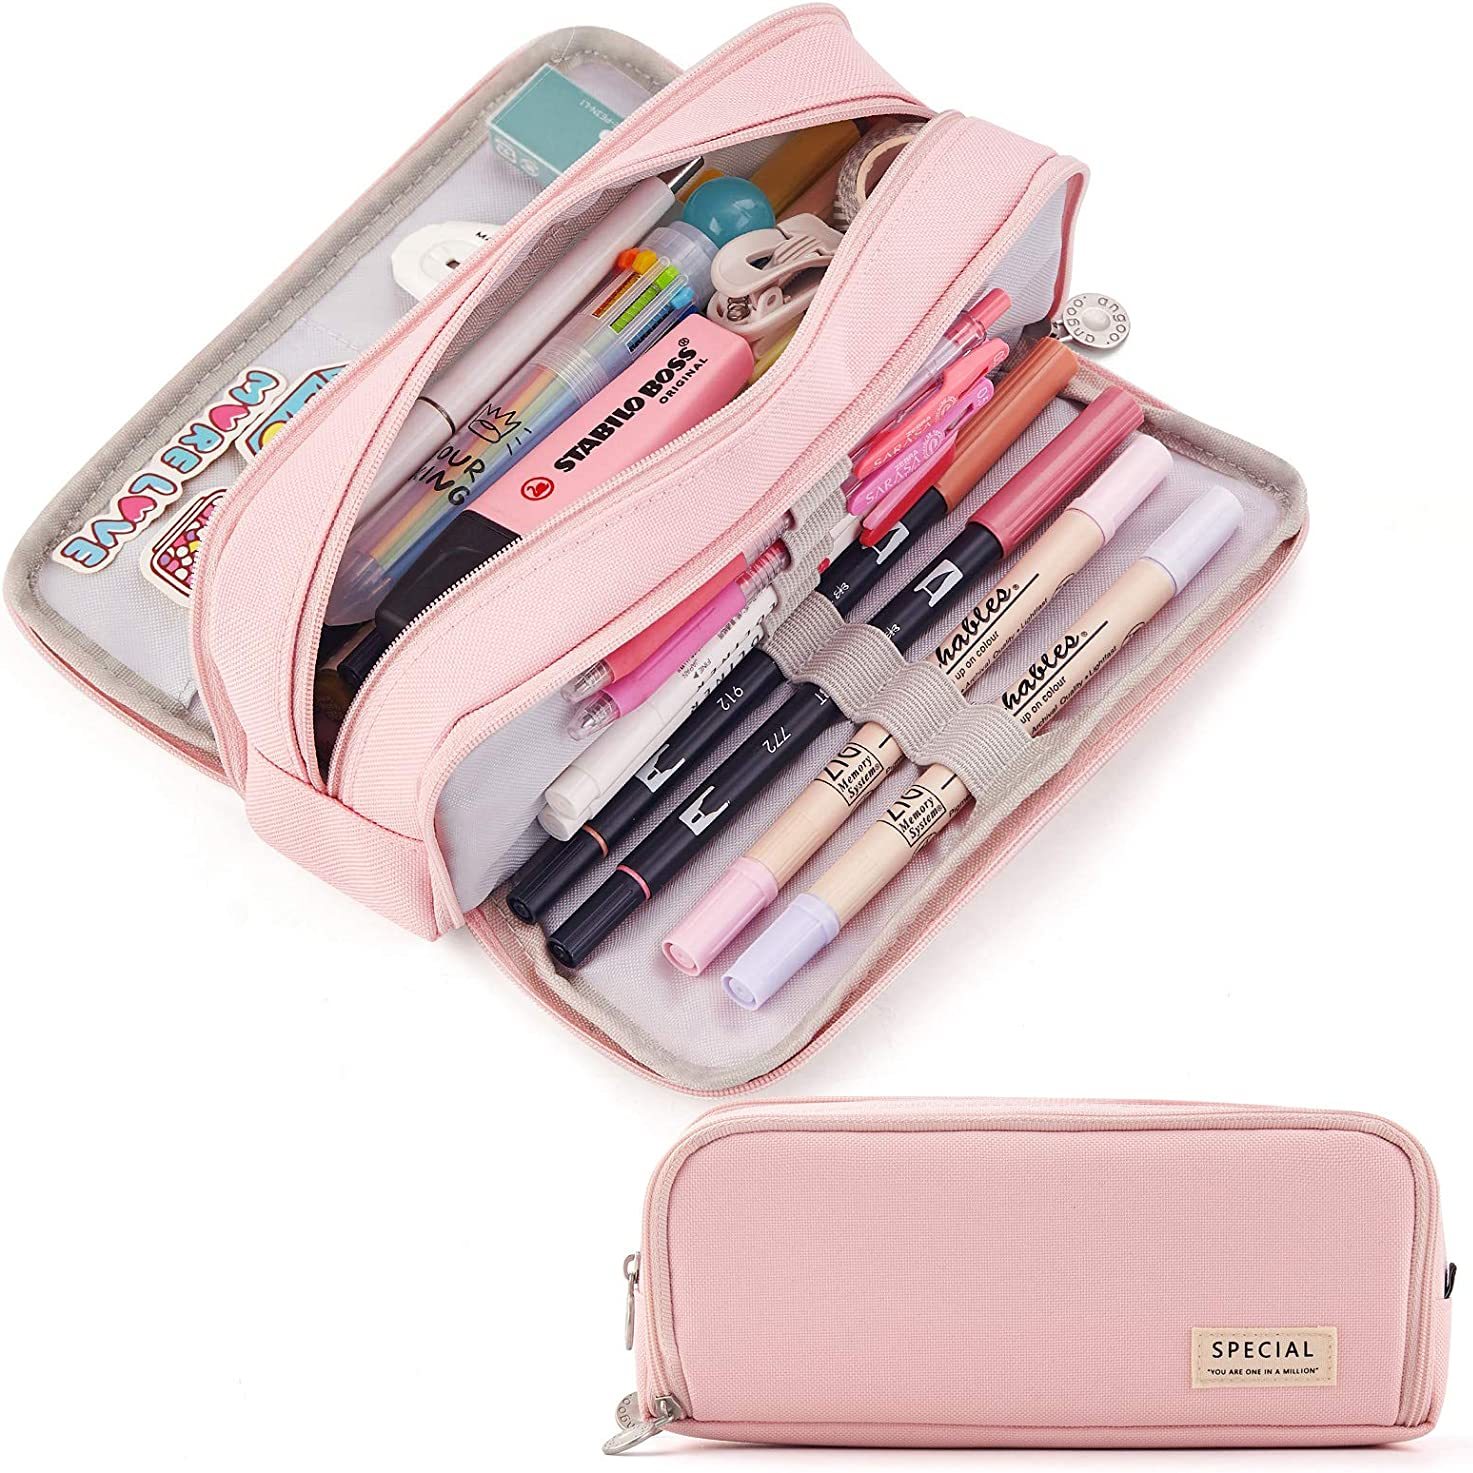 Lilyme Pencil Case Telescopic Pencil Bag Cute Stand Up Pen Holder Office  Portable Storage Pencil Pouch Corduroy Pink